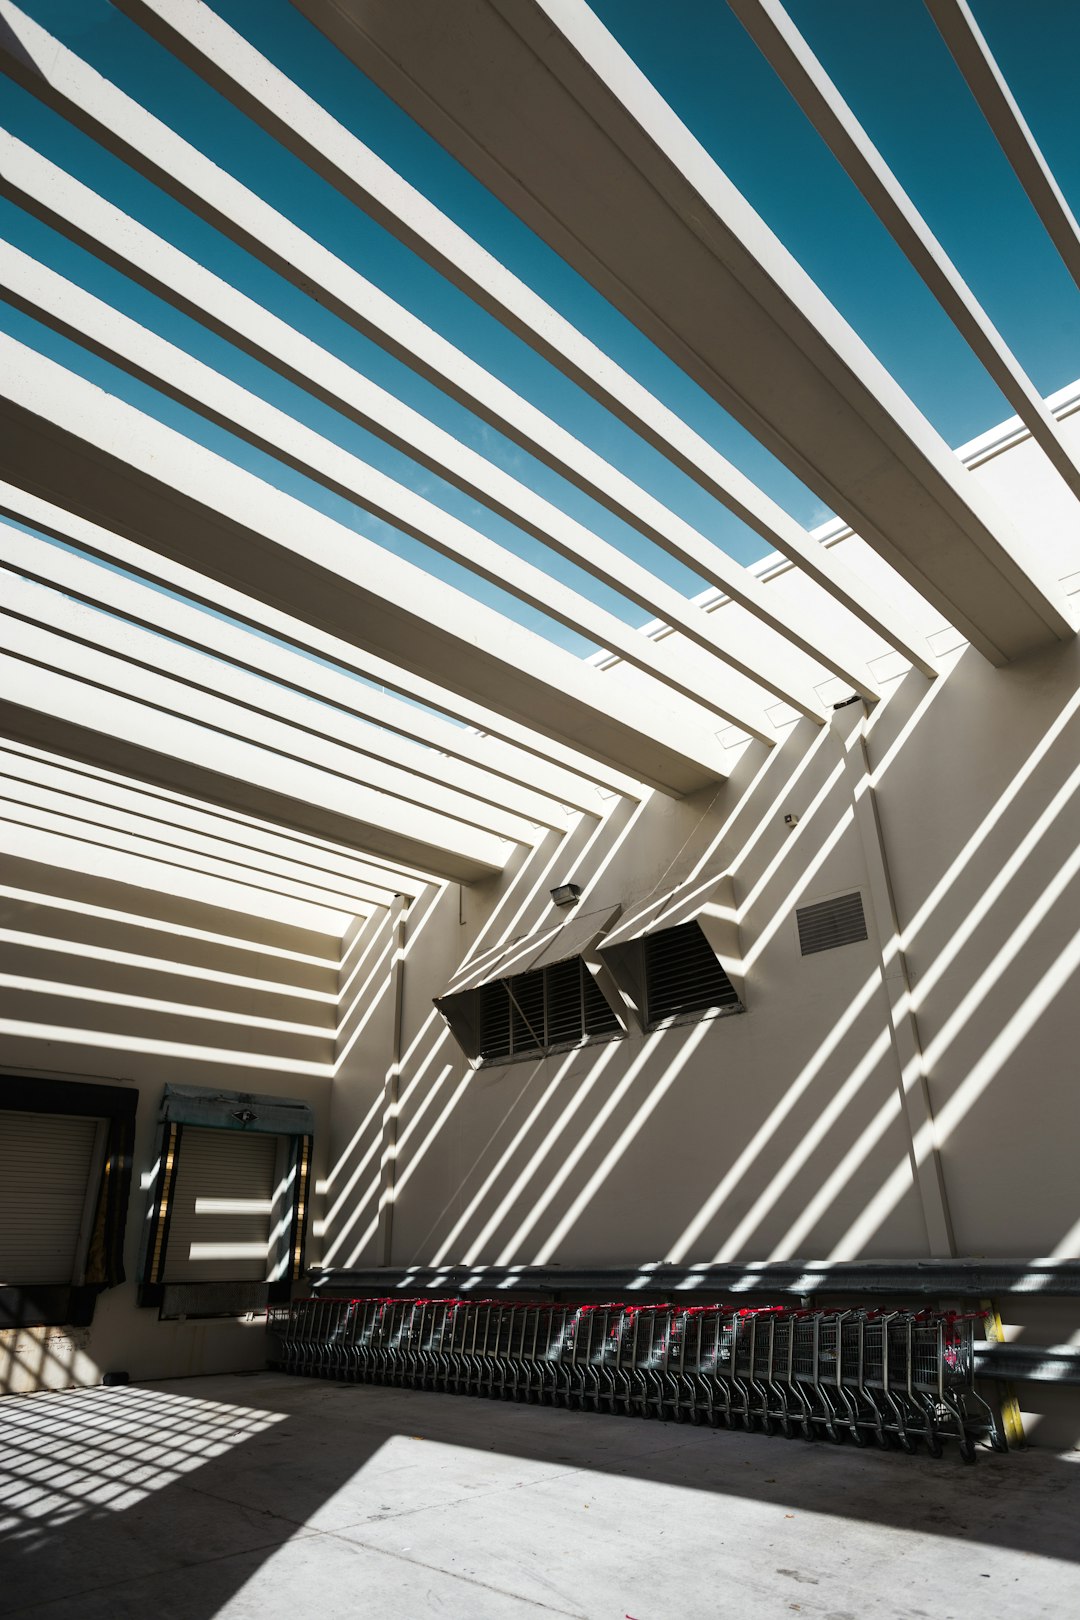 A photograph of the exterior ceiling and roof of an outdoor shopping center, featuring white lines that create geometric patterns on its surface. The sunlight casts dramatic shadows through these stripes onto two rows of shopping carts placed below. This shot captures the modern architecture with its clean design, emphasizing light effects and creating visual interest in architectural details. The photograph was taken with a Fujifilm GFX 50S camera using settings for high detail and with a wide angle lens perspective.